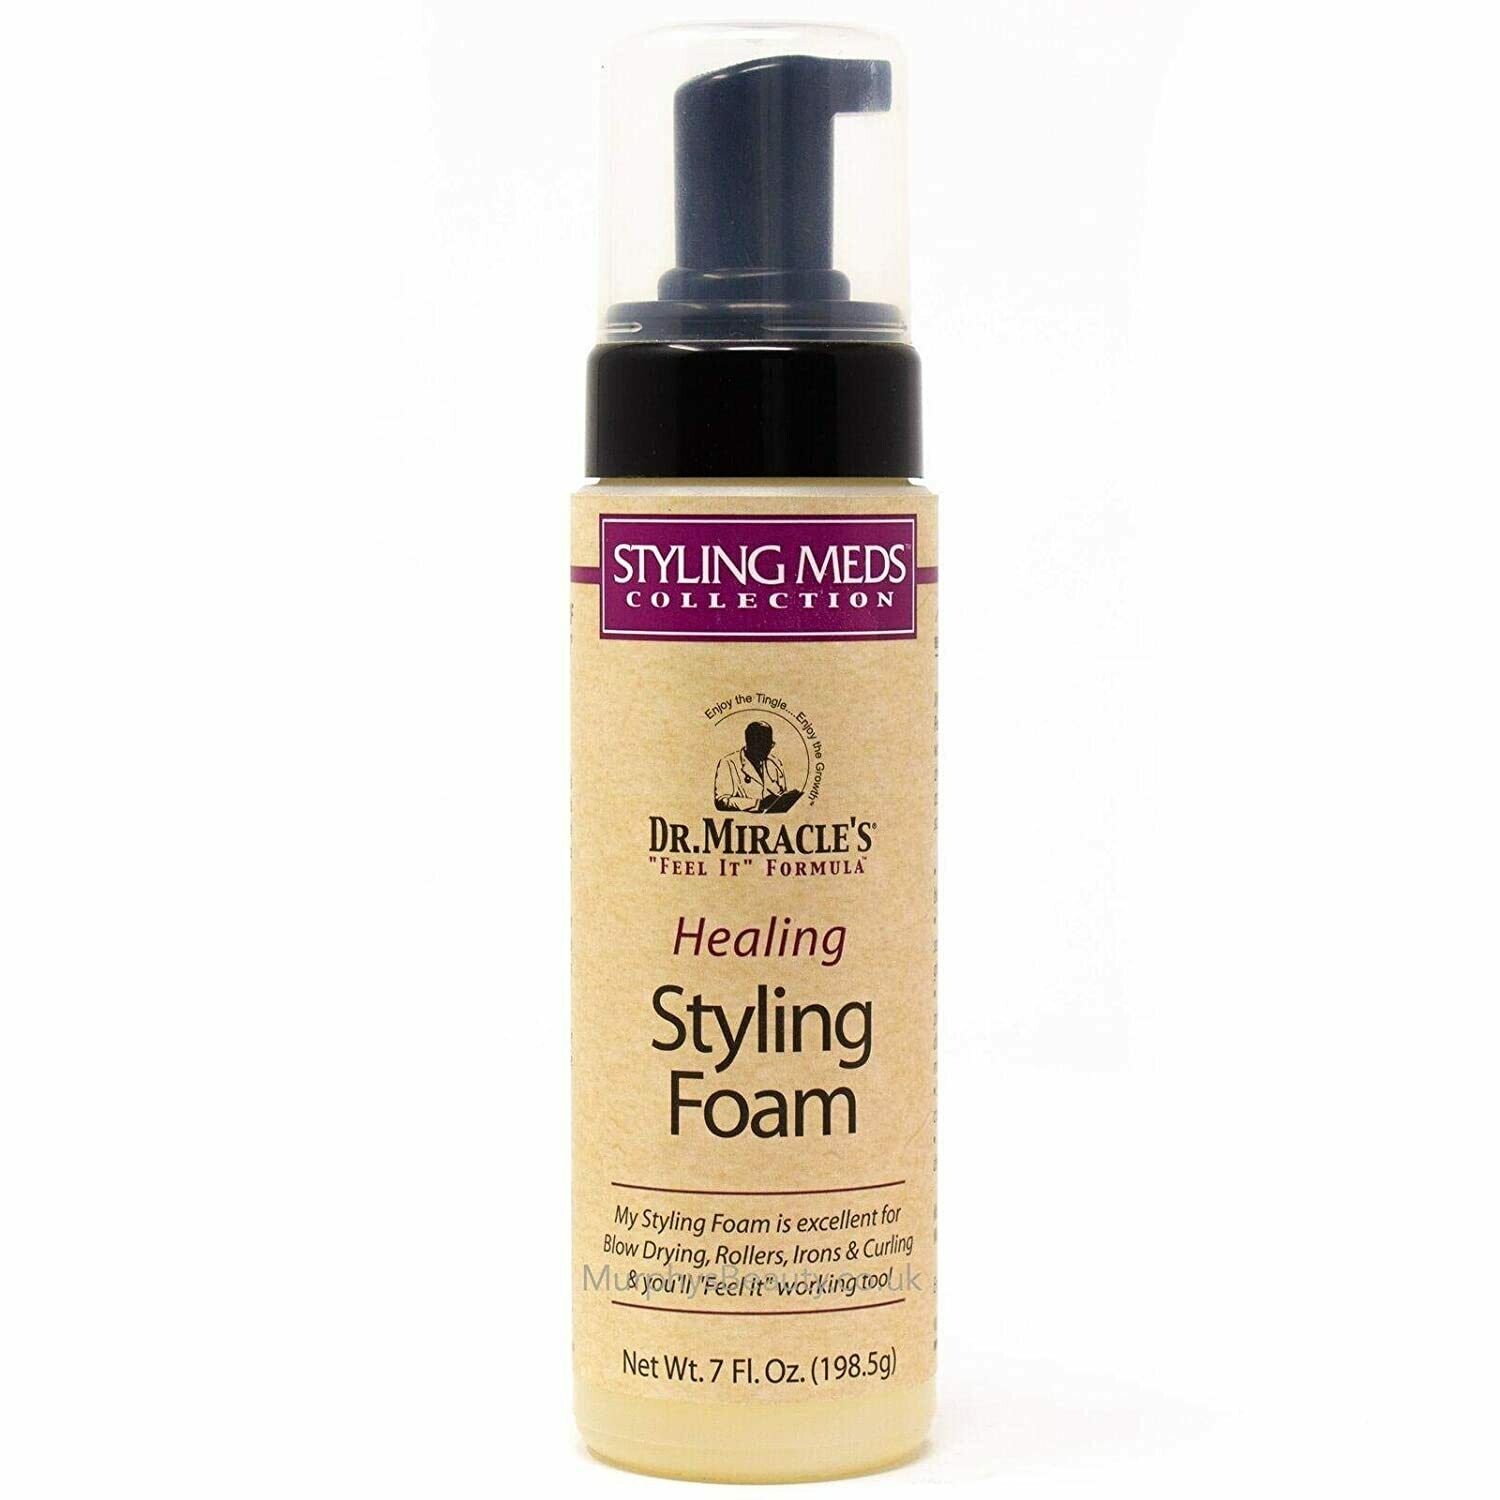 Dr Miracle's Healing Styling Foam